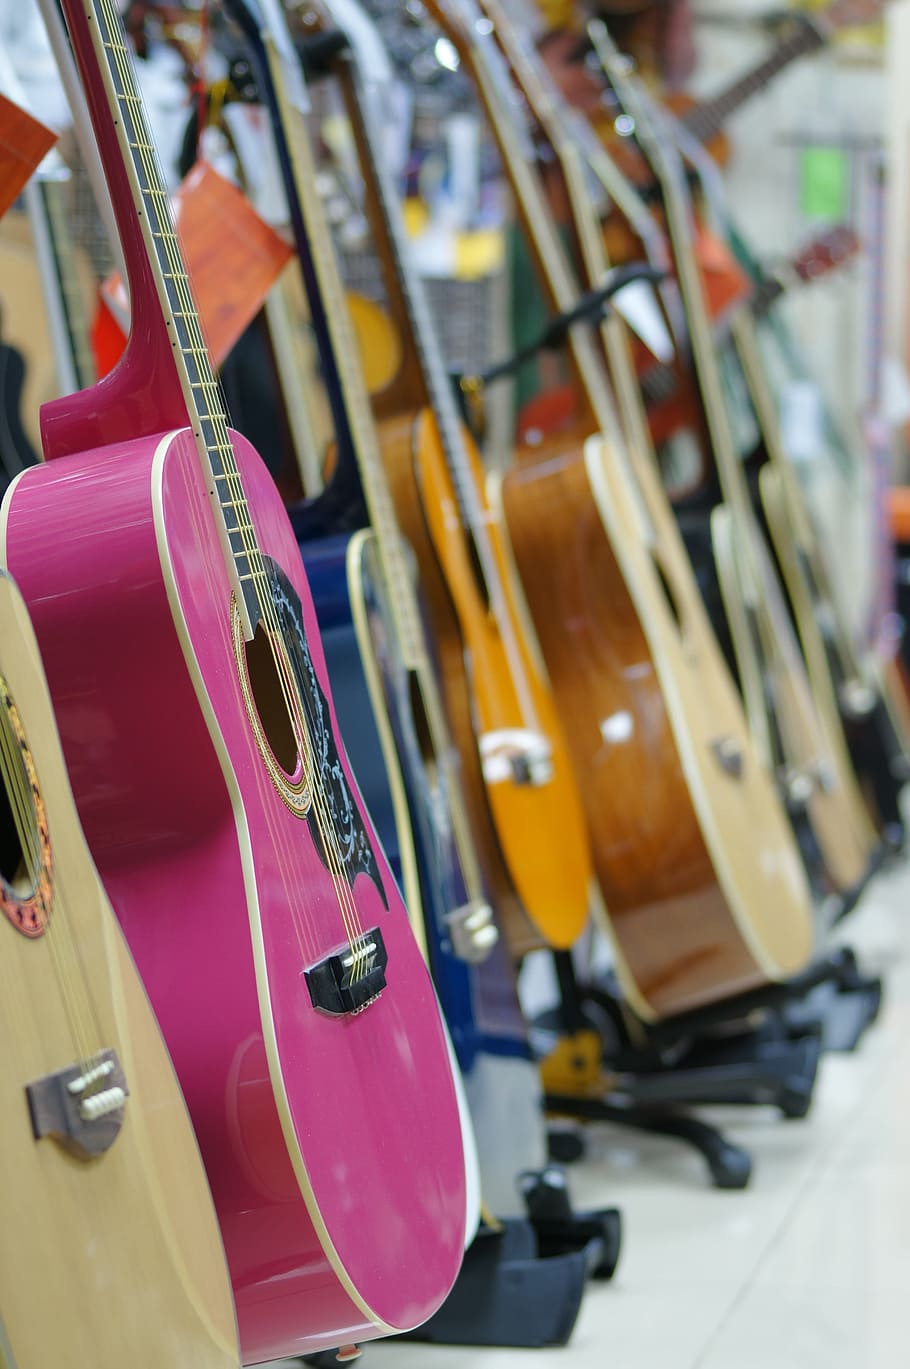 guitar, musical instrument, pink guitar, large, music, stringed instruments, strings, tool, acoustics, electric guitar